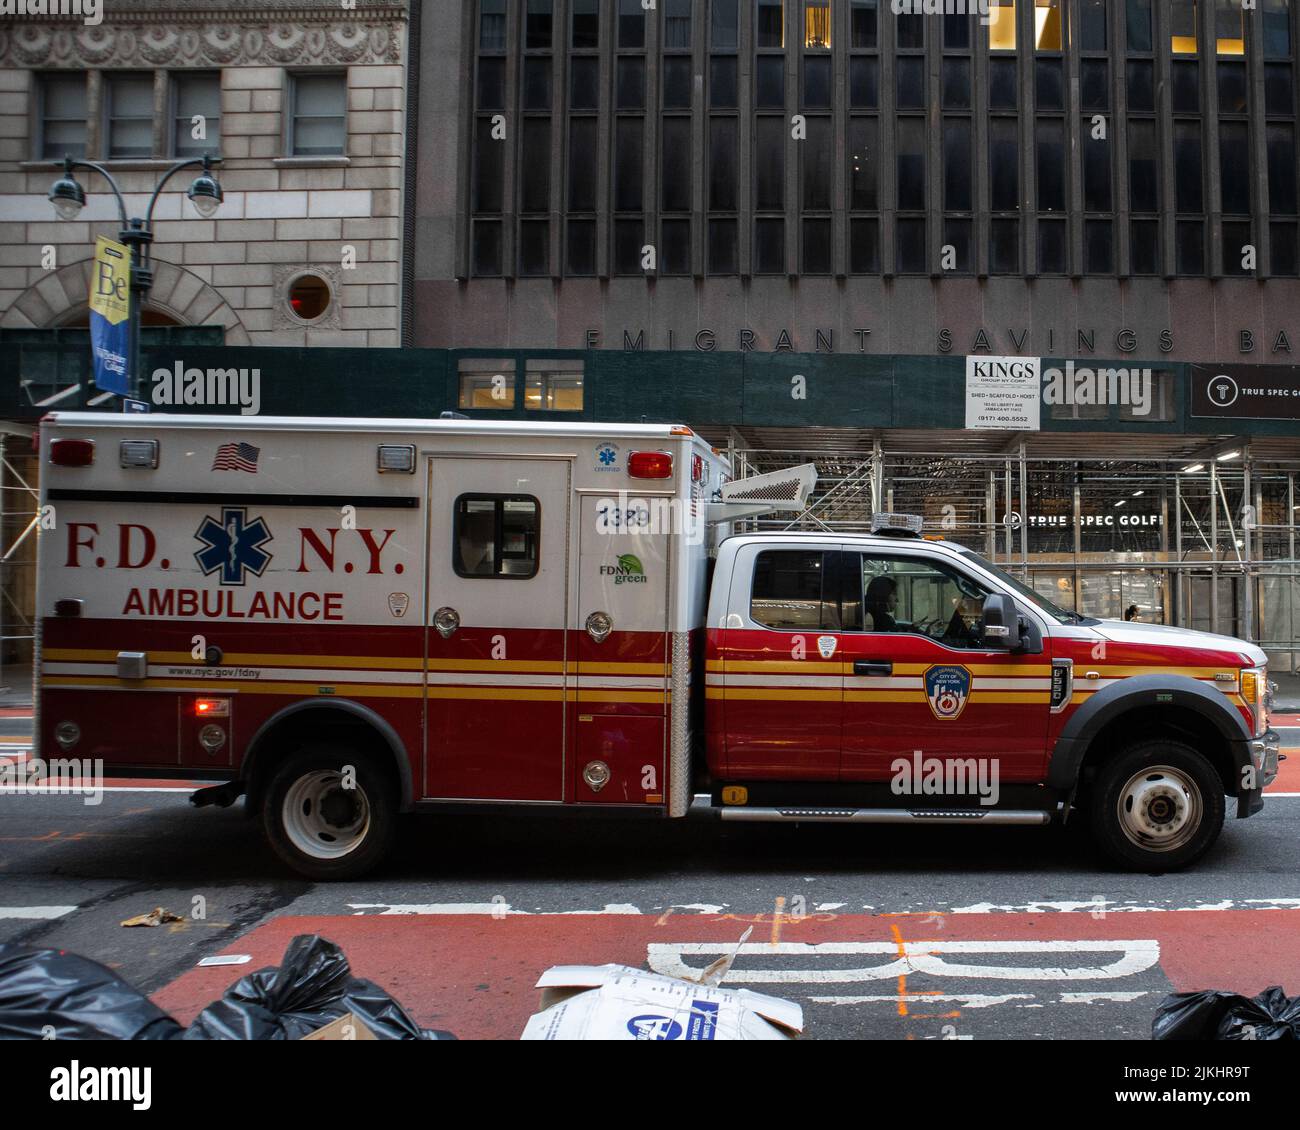 The F.D.N.Y Truck on patrol, New York City, NY Stock Photo